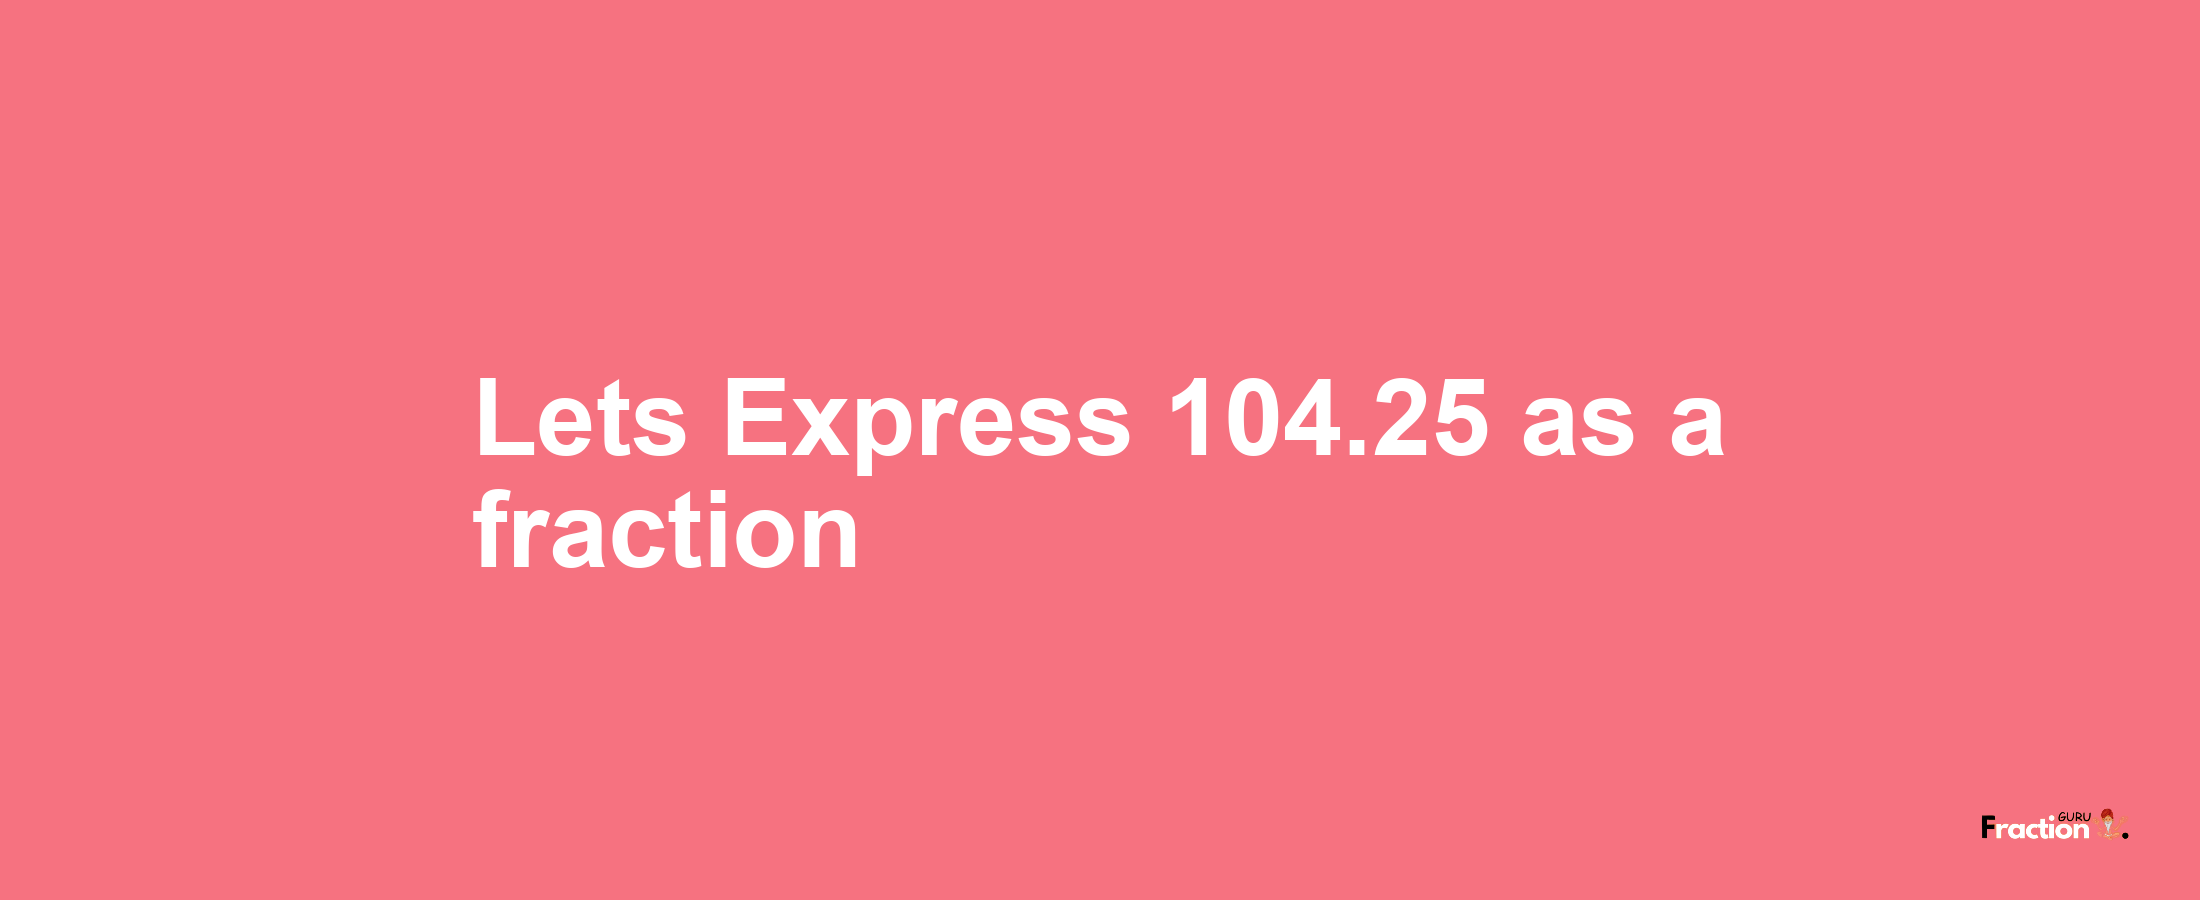 Lets Express 104.25 as afraction